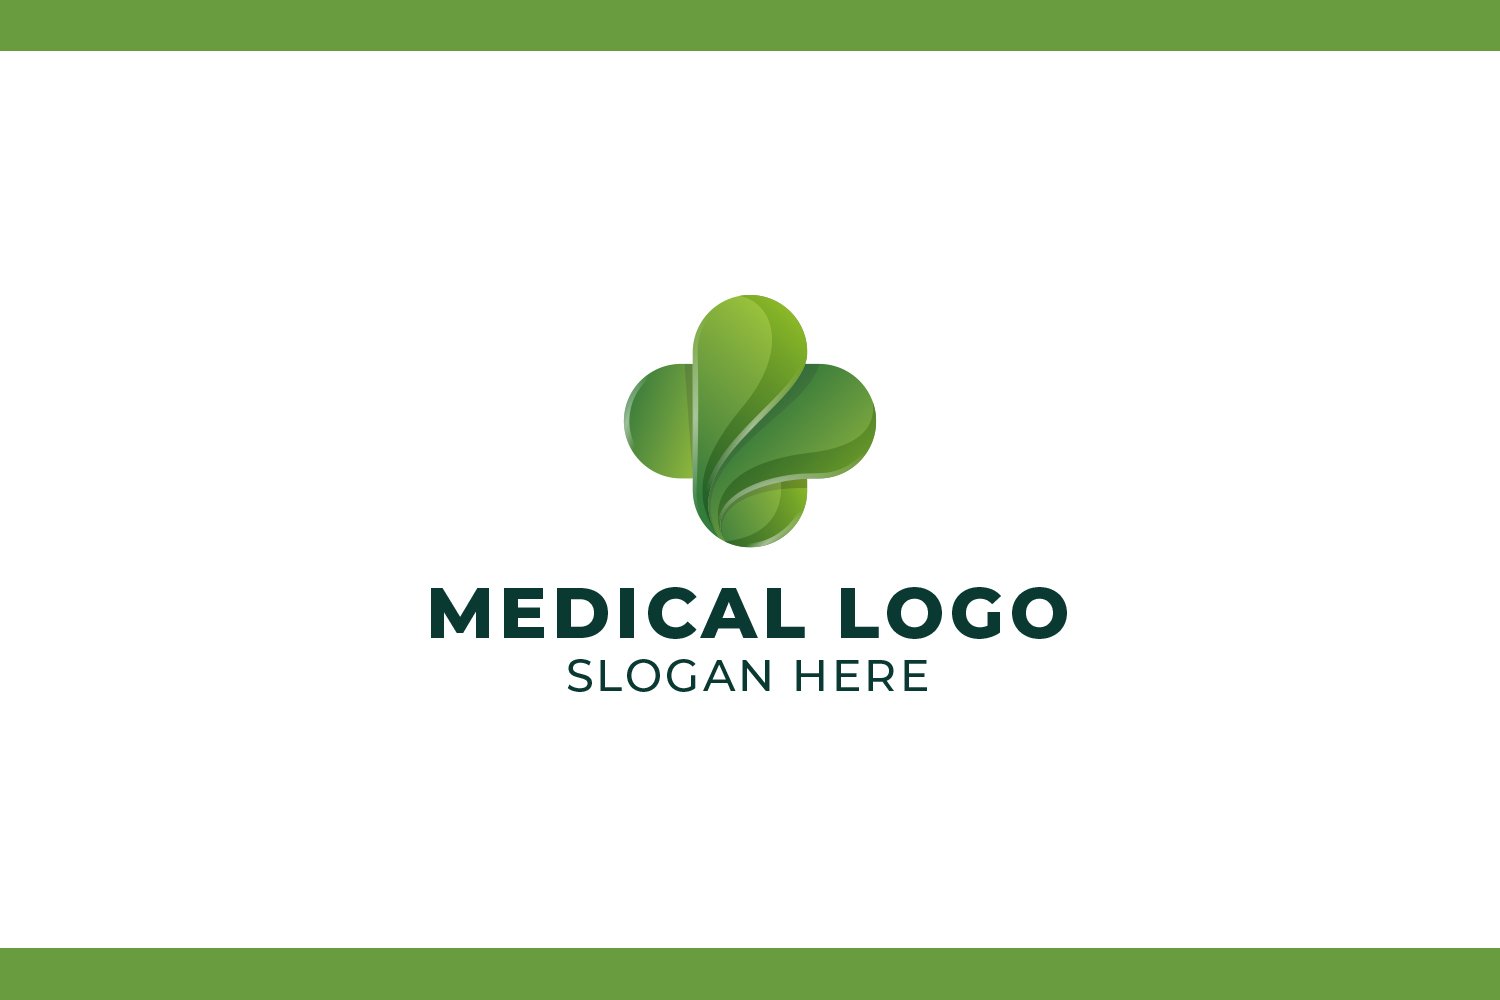 Abstract Green Leaf And Blue Cross Medical Vector Logo Design. Royalty Free  SVG, Cliparts, Vectors, and Stock Illustration. Image 92424652.